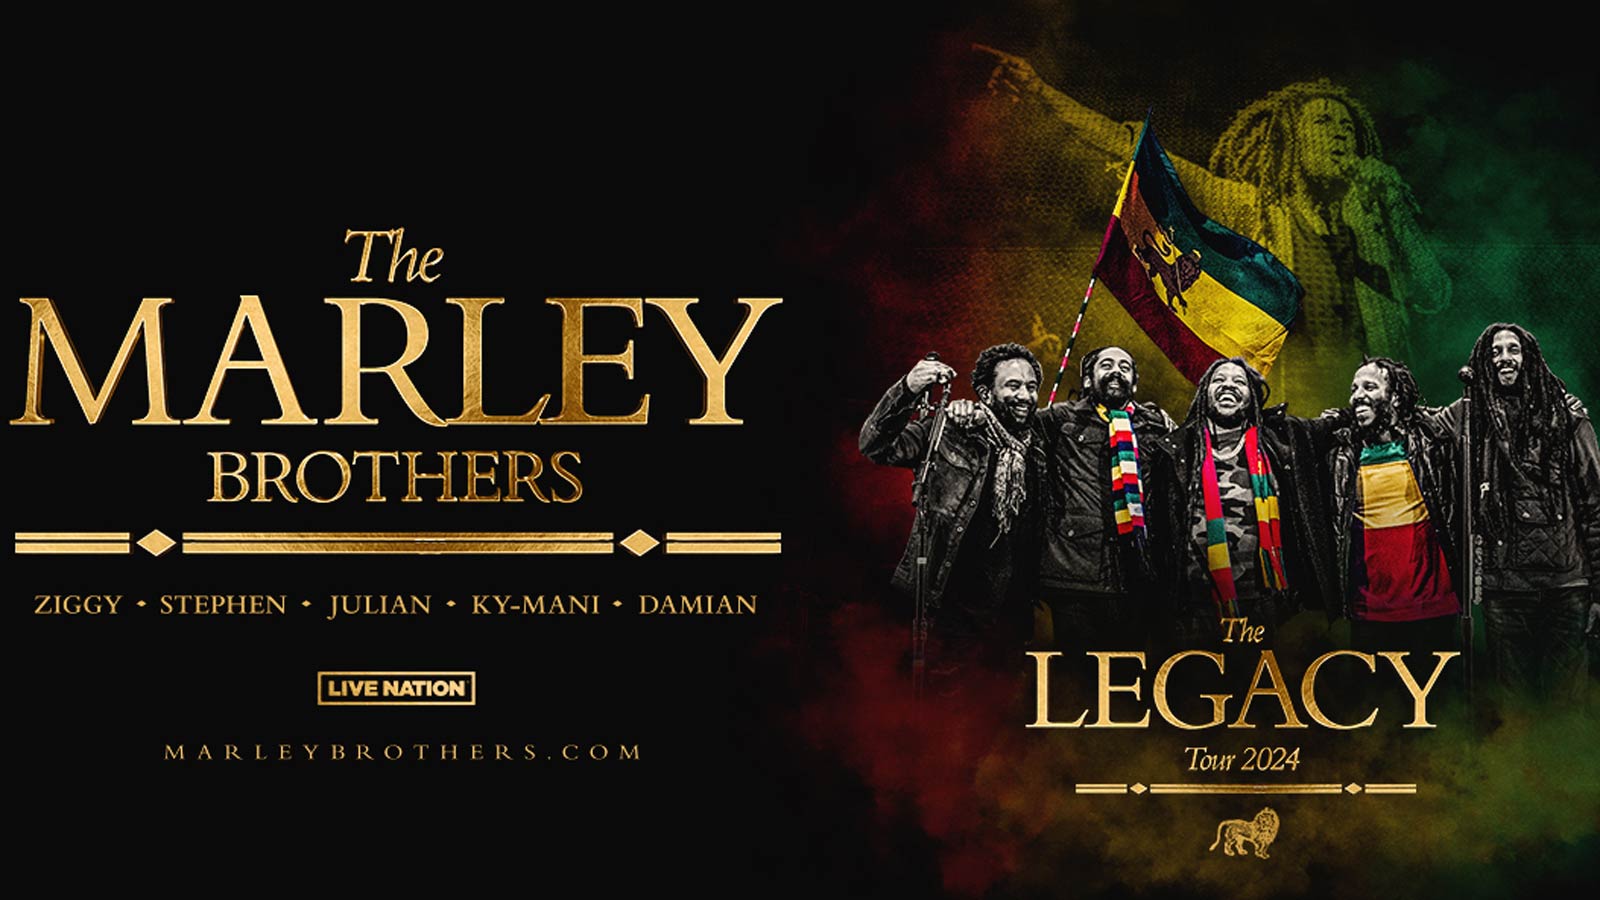 A promotional graphic for “The Marley Brothers: The Legacy Tour” shows Ziggy, Stephen, Julian, ...